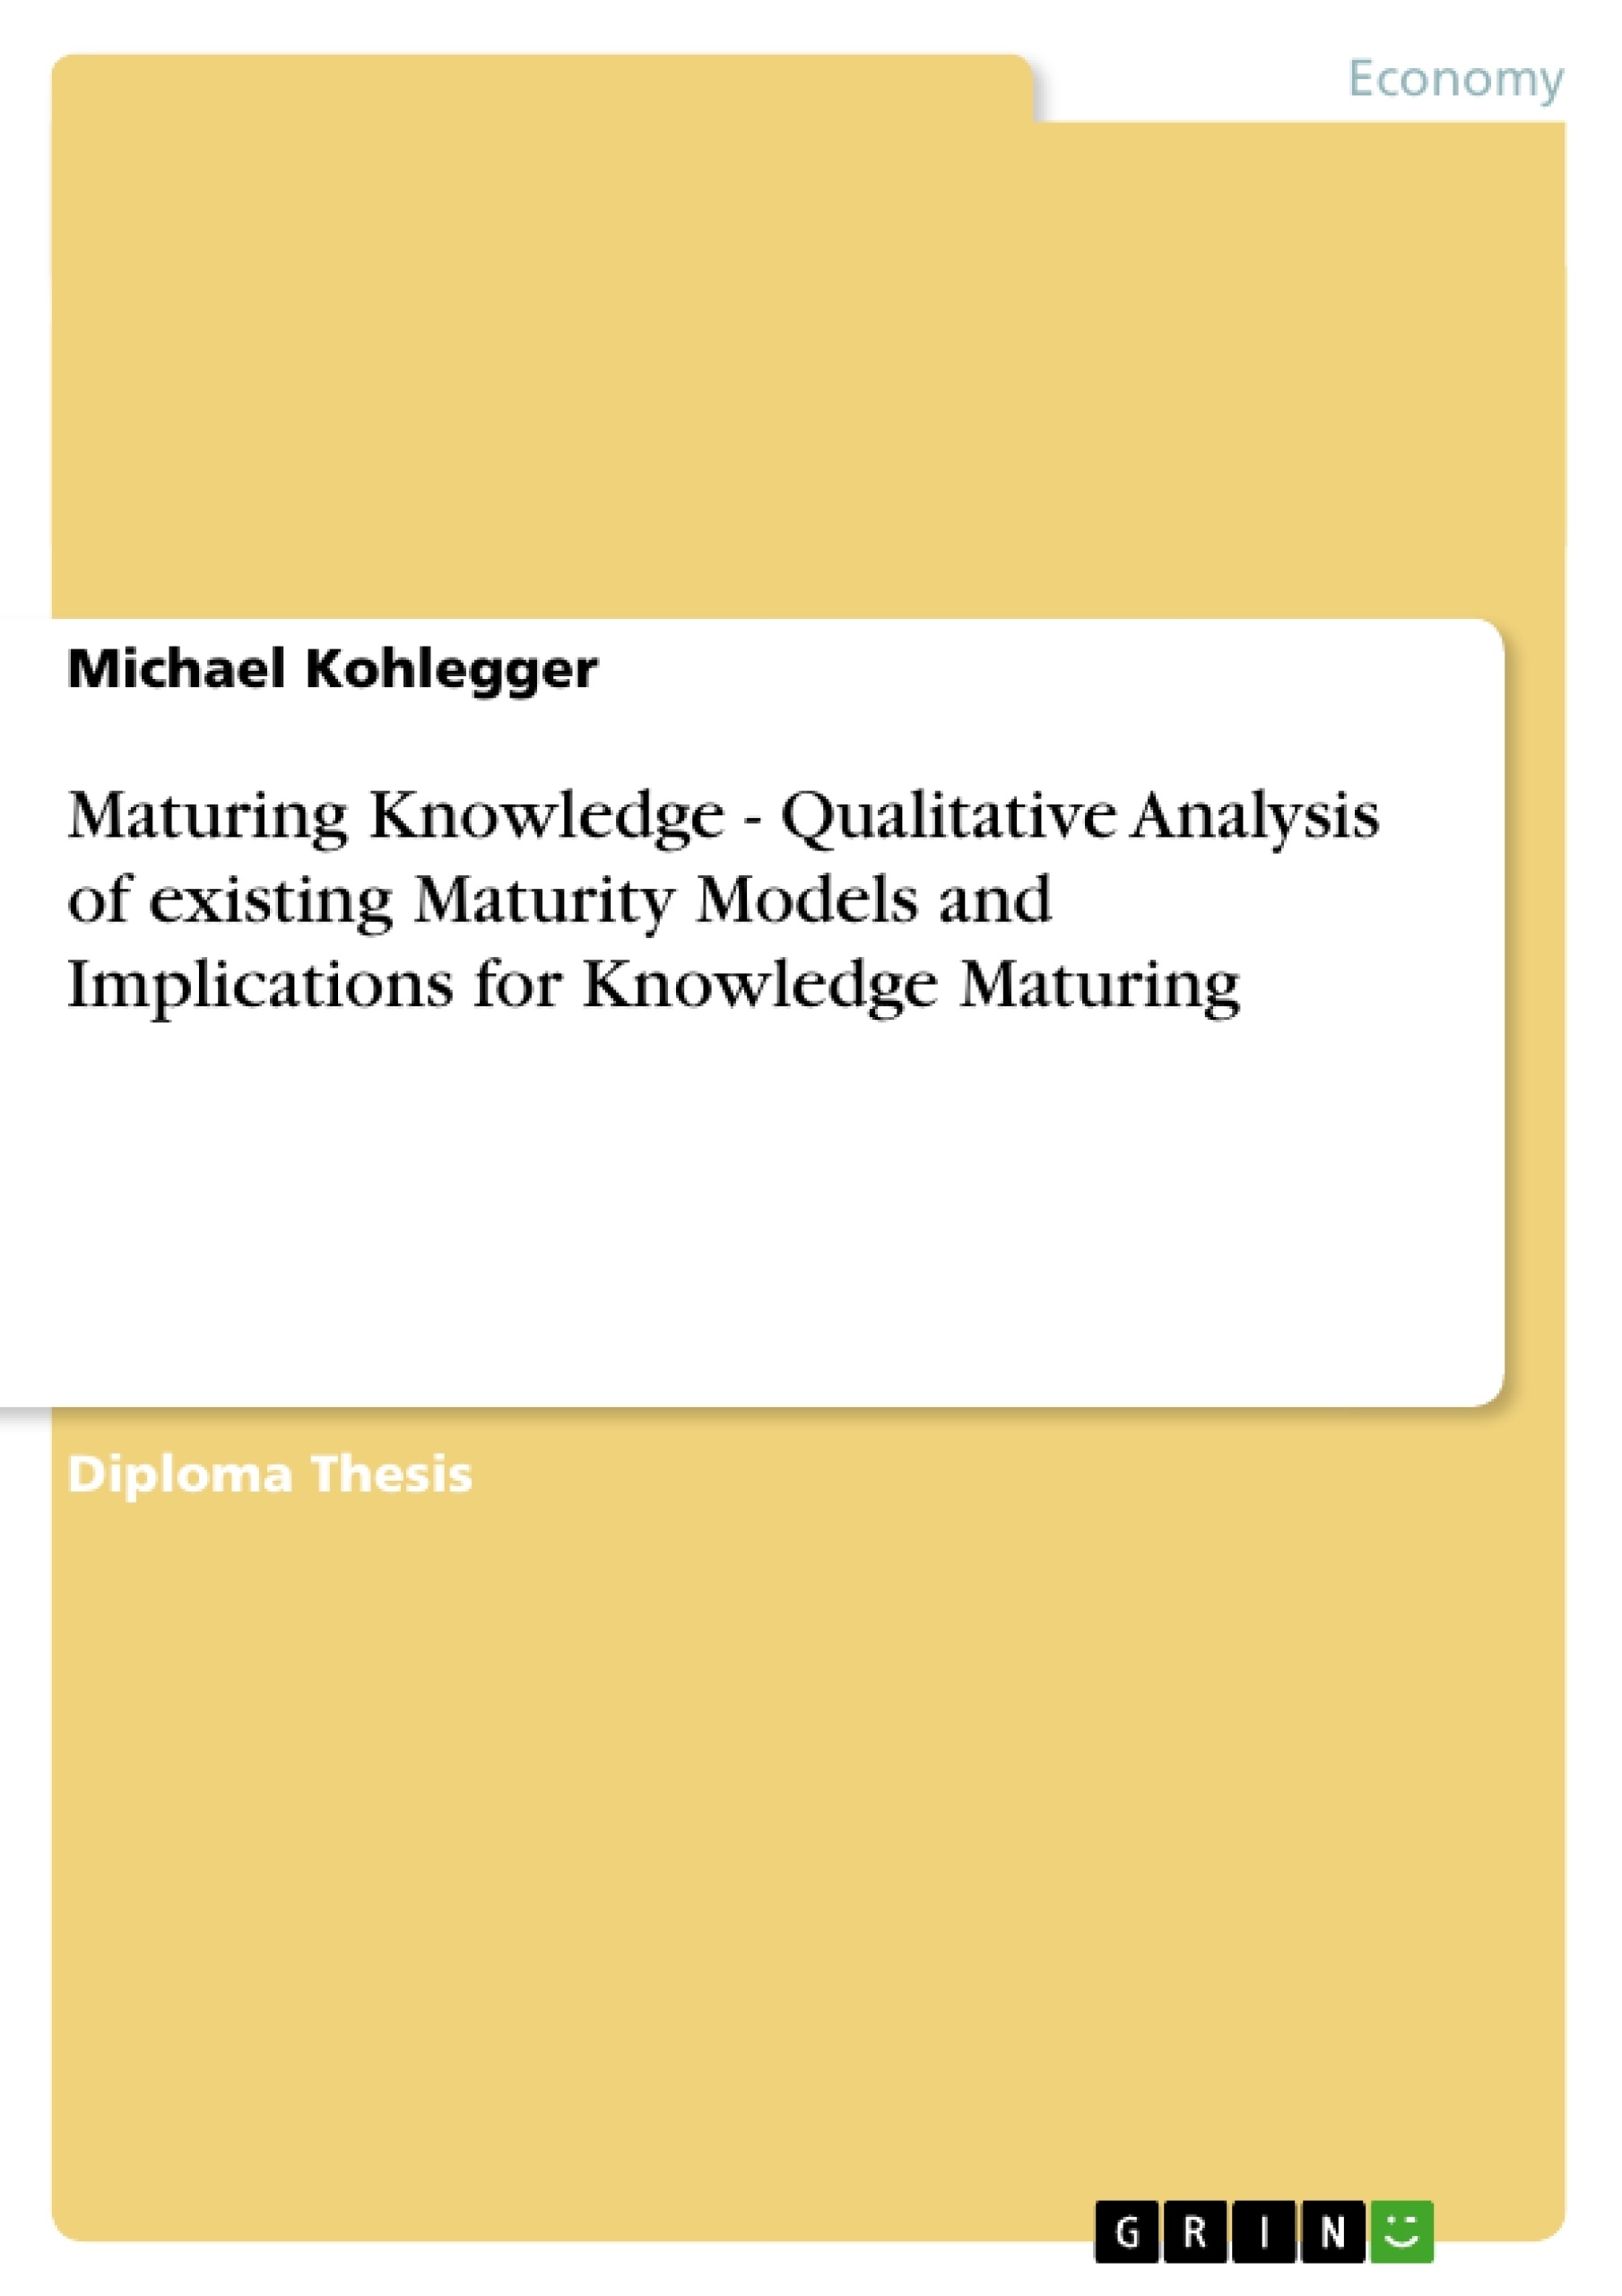 Titre: Maturing Knowledge - Qualitative Analysis of existing Maturity Models and Implications for Knowledge Maturing